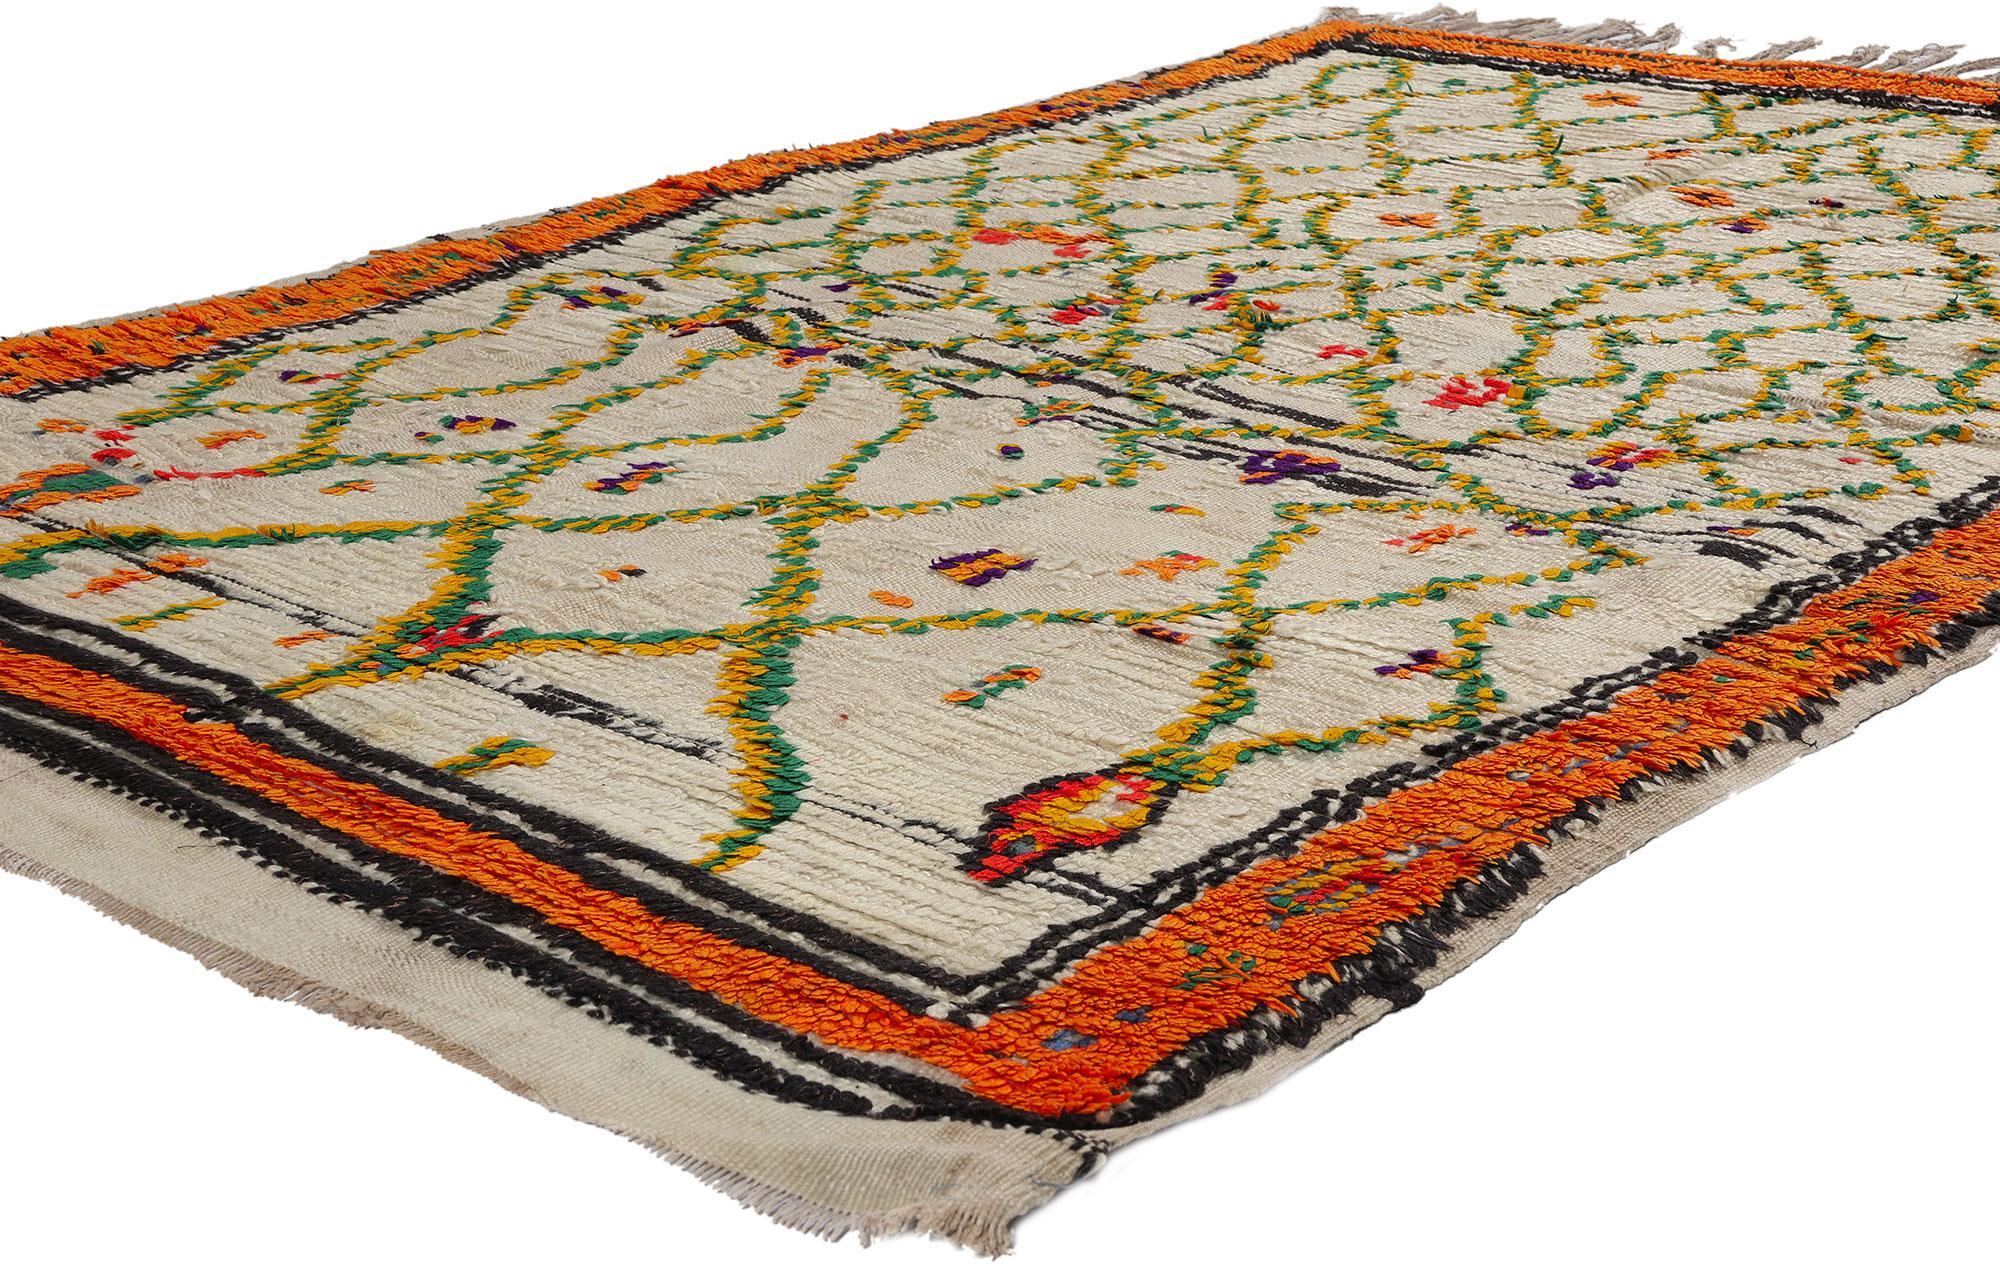 21736 Colorful Vintage Moroccan Azilal Rug, 04'02 x 06'06. Step into the lively realm of Azilal rugs, where each thread intricately tells a story, crafted by skilled artisans amidst the dynamic landscapes of central Morocco and the majestic High